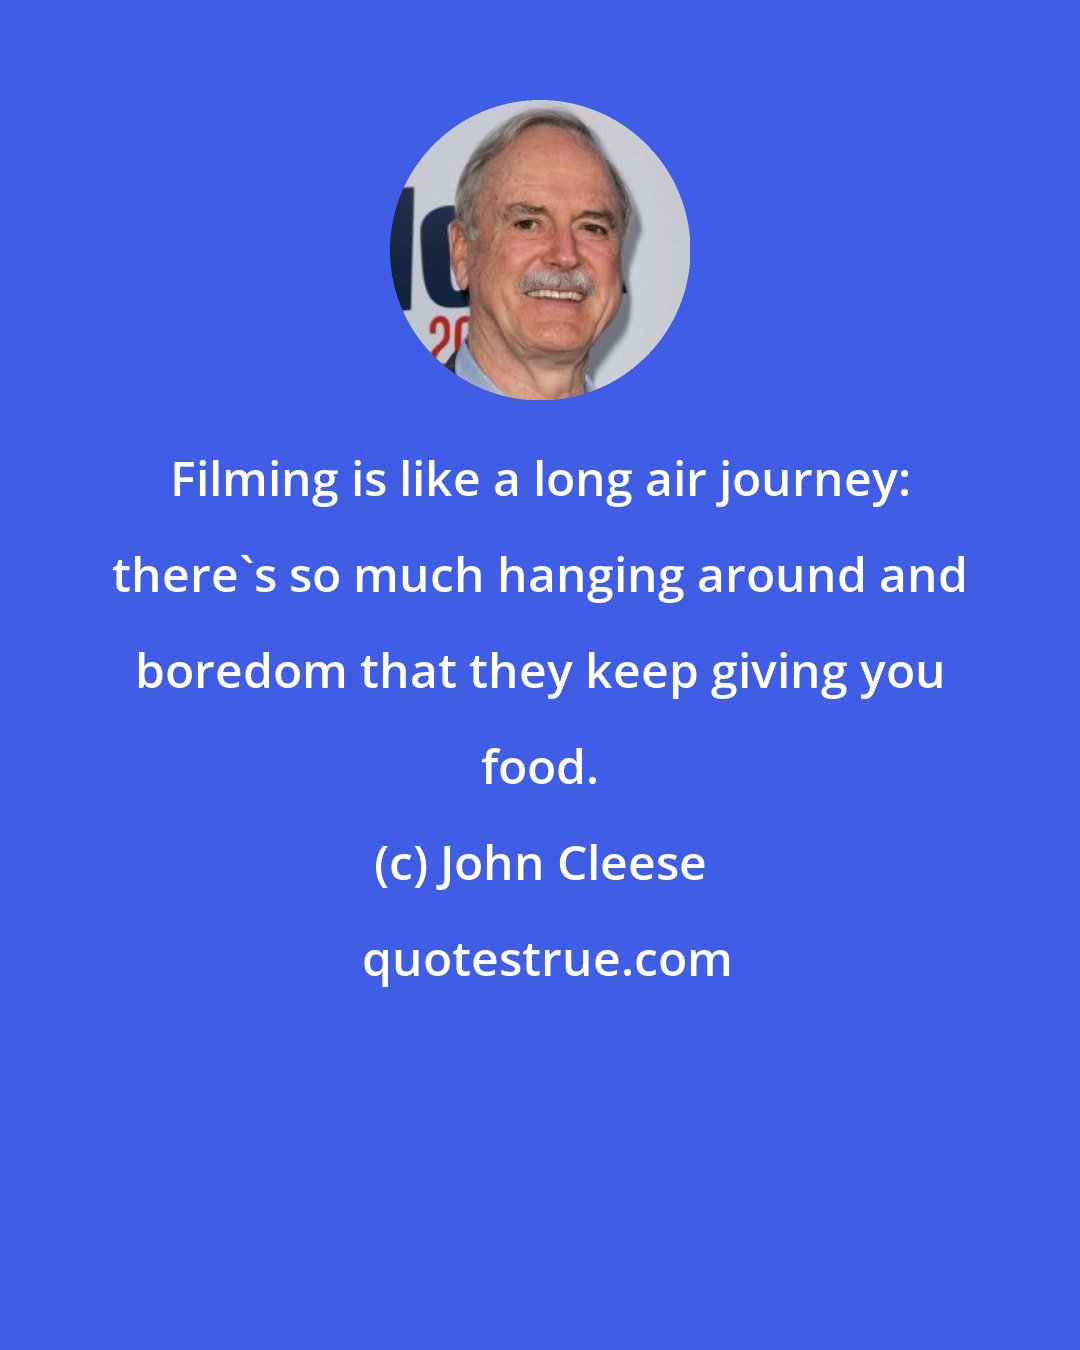 John Cleese: Filming is like a long air journey: there's so much hanging around and boredom that they keep giving you food.